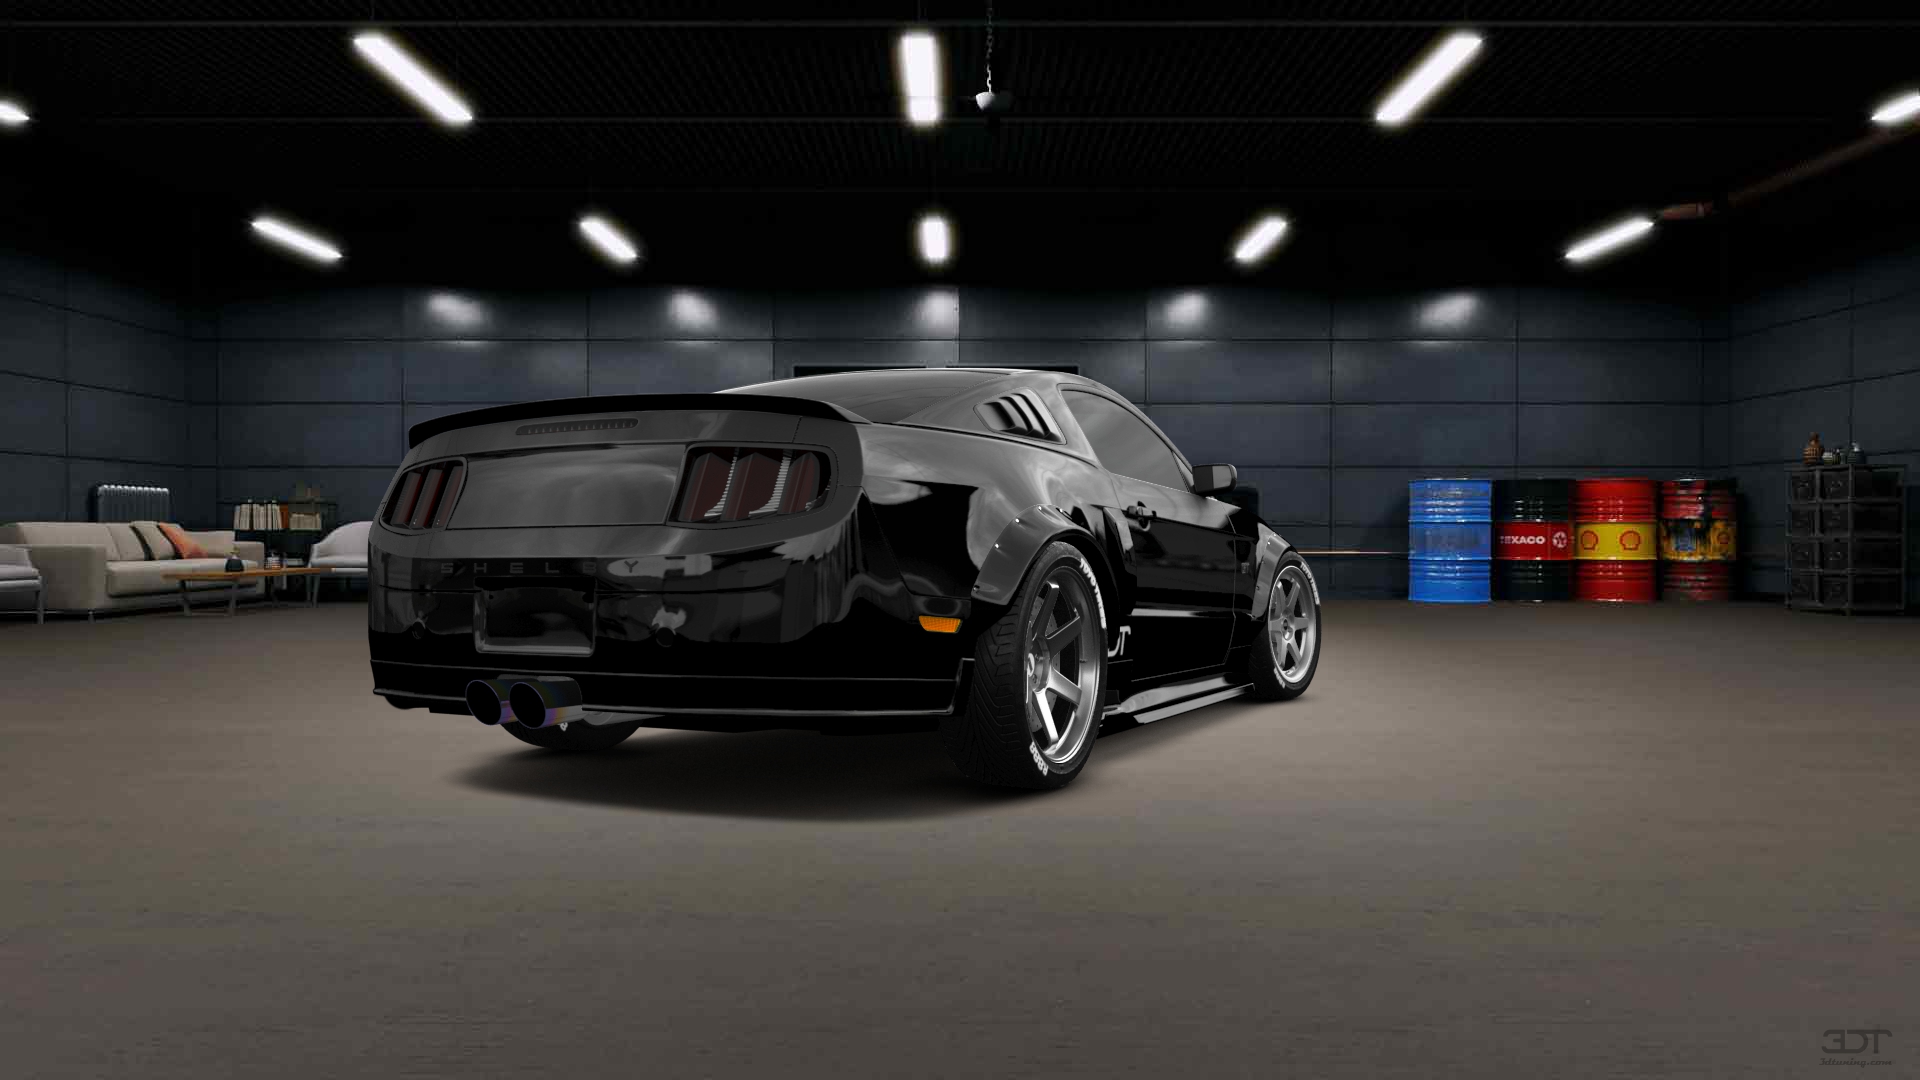 Ford Mustang challenge 2 Door Coupe 4010 tuning